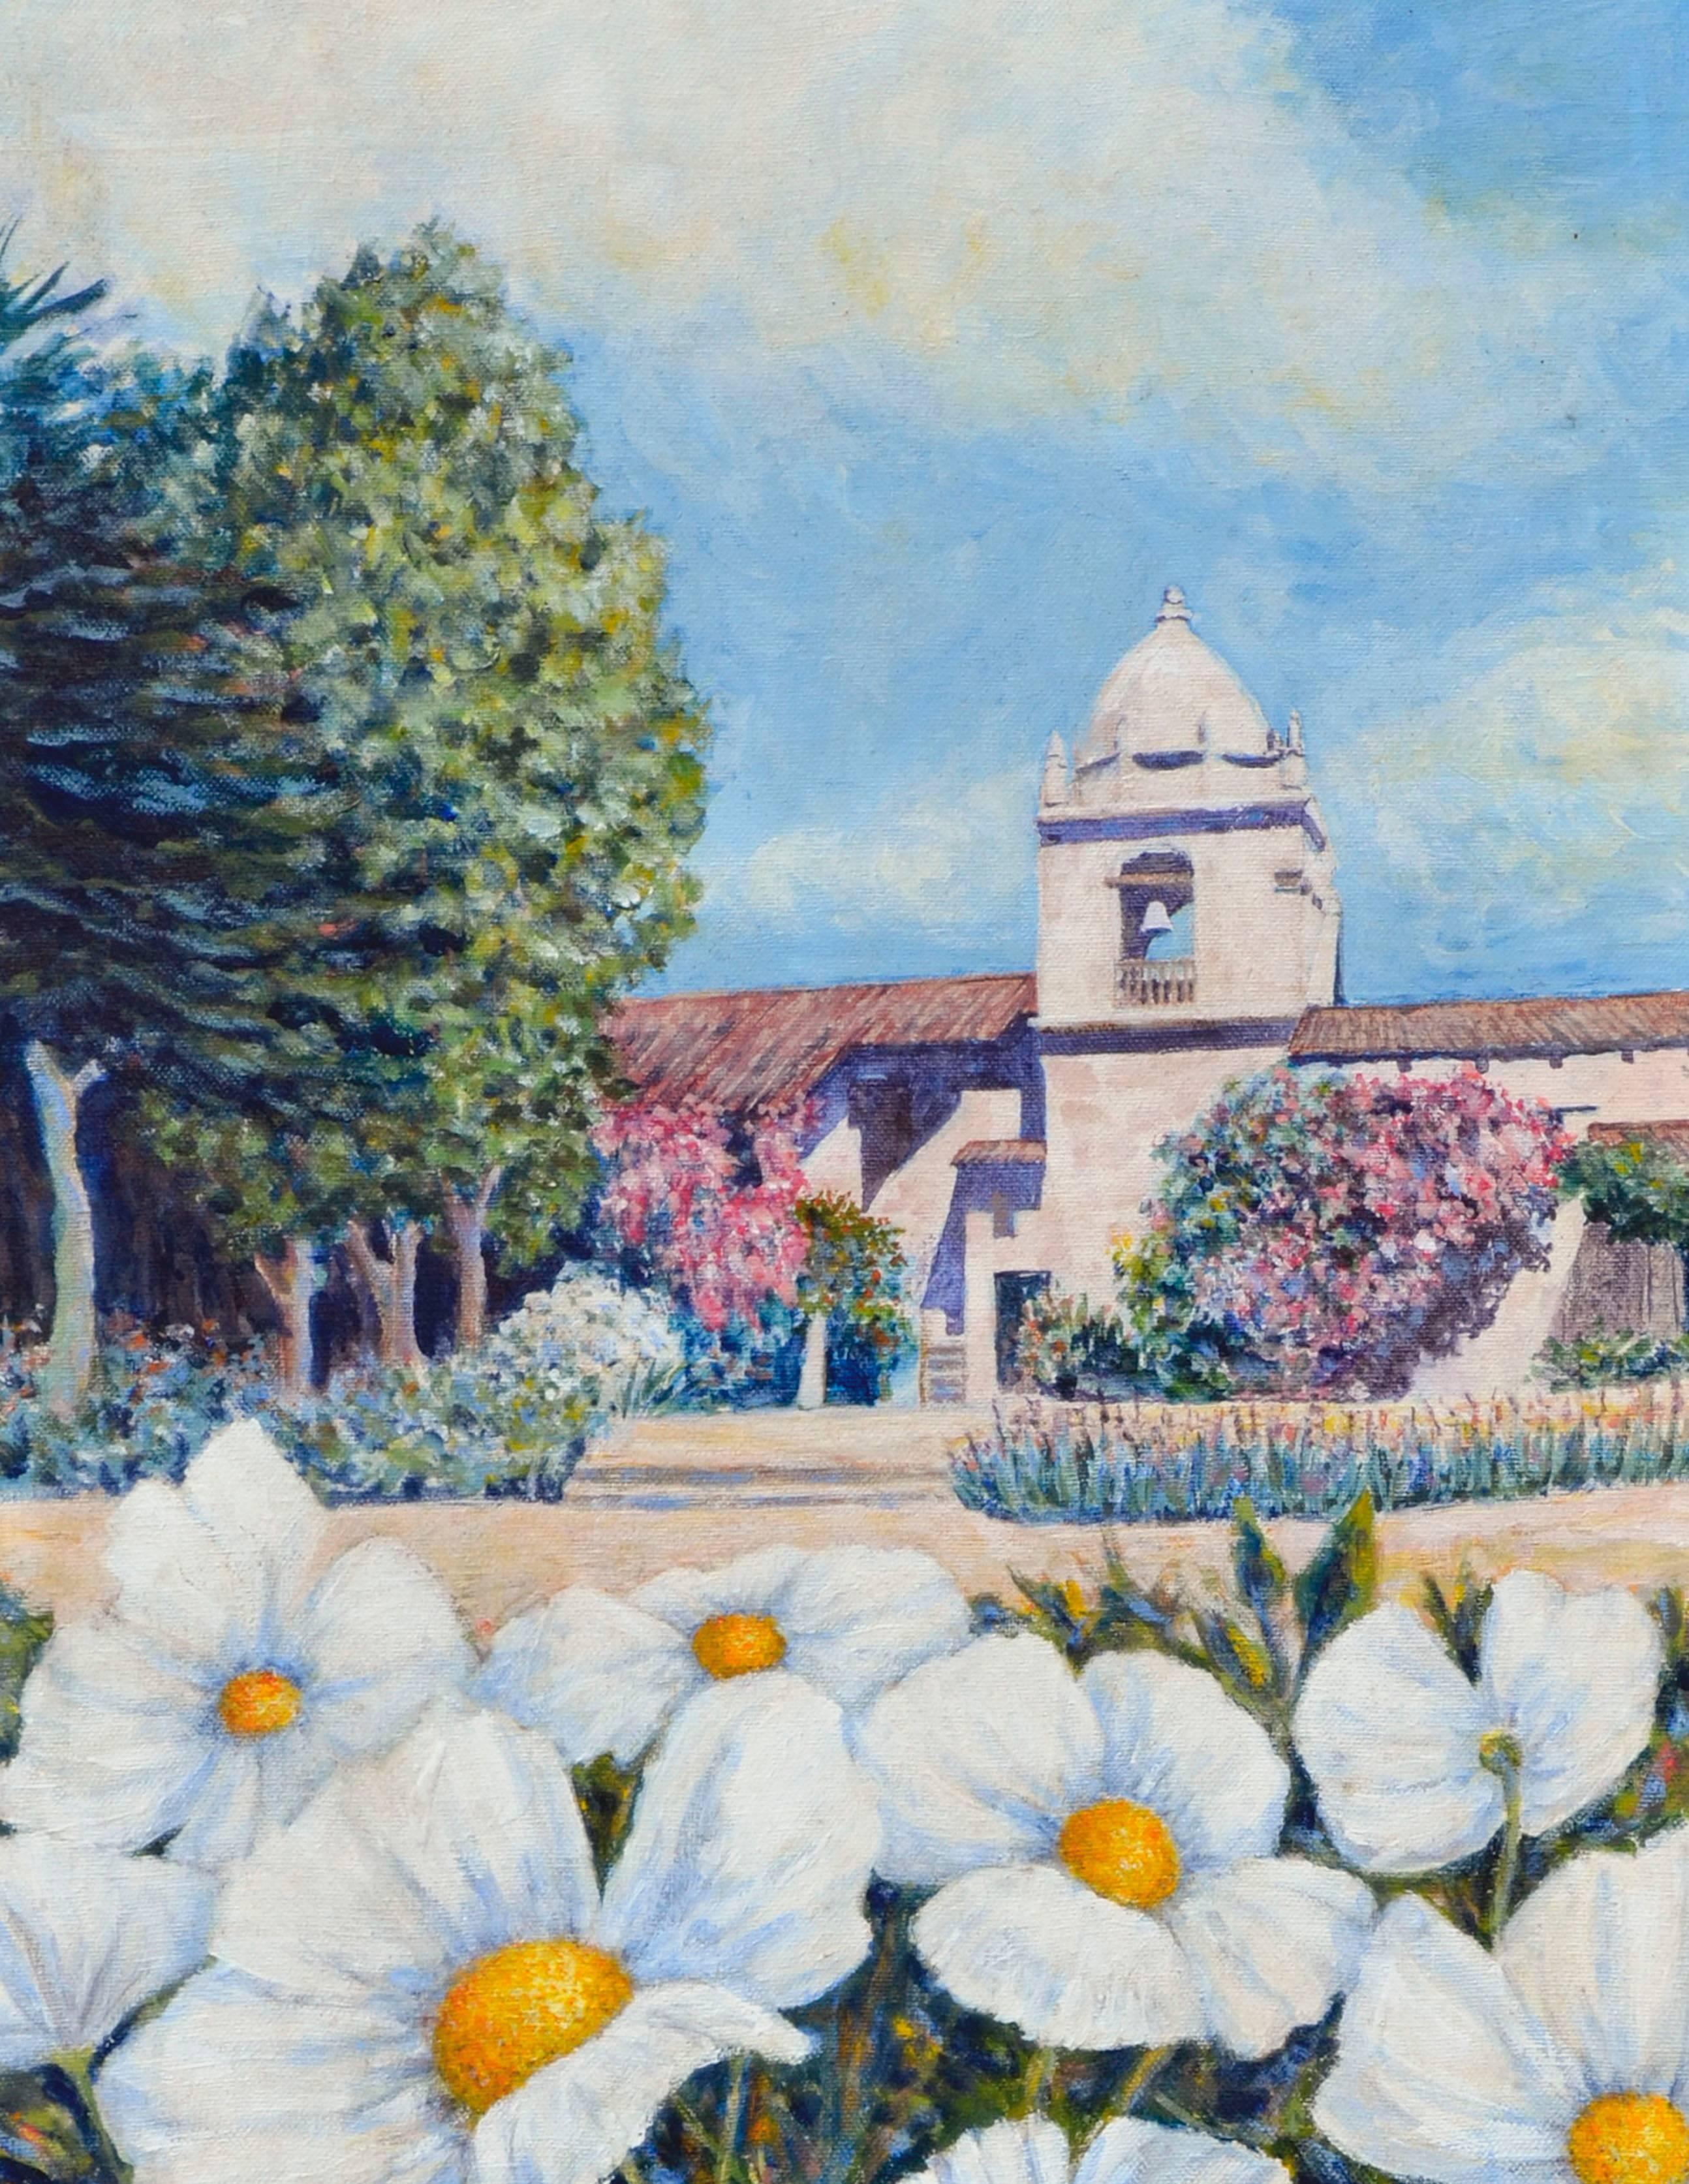 Vintage Carmel Mission Landscape with Flowers  - Painting by Virginia Francesca Fry